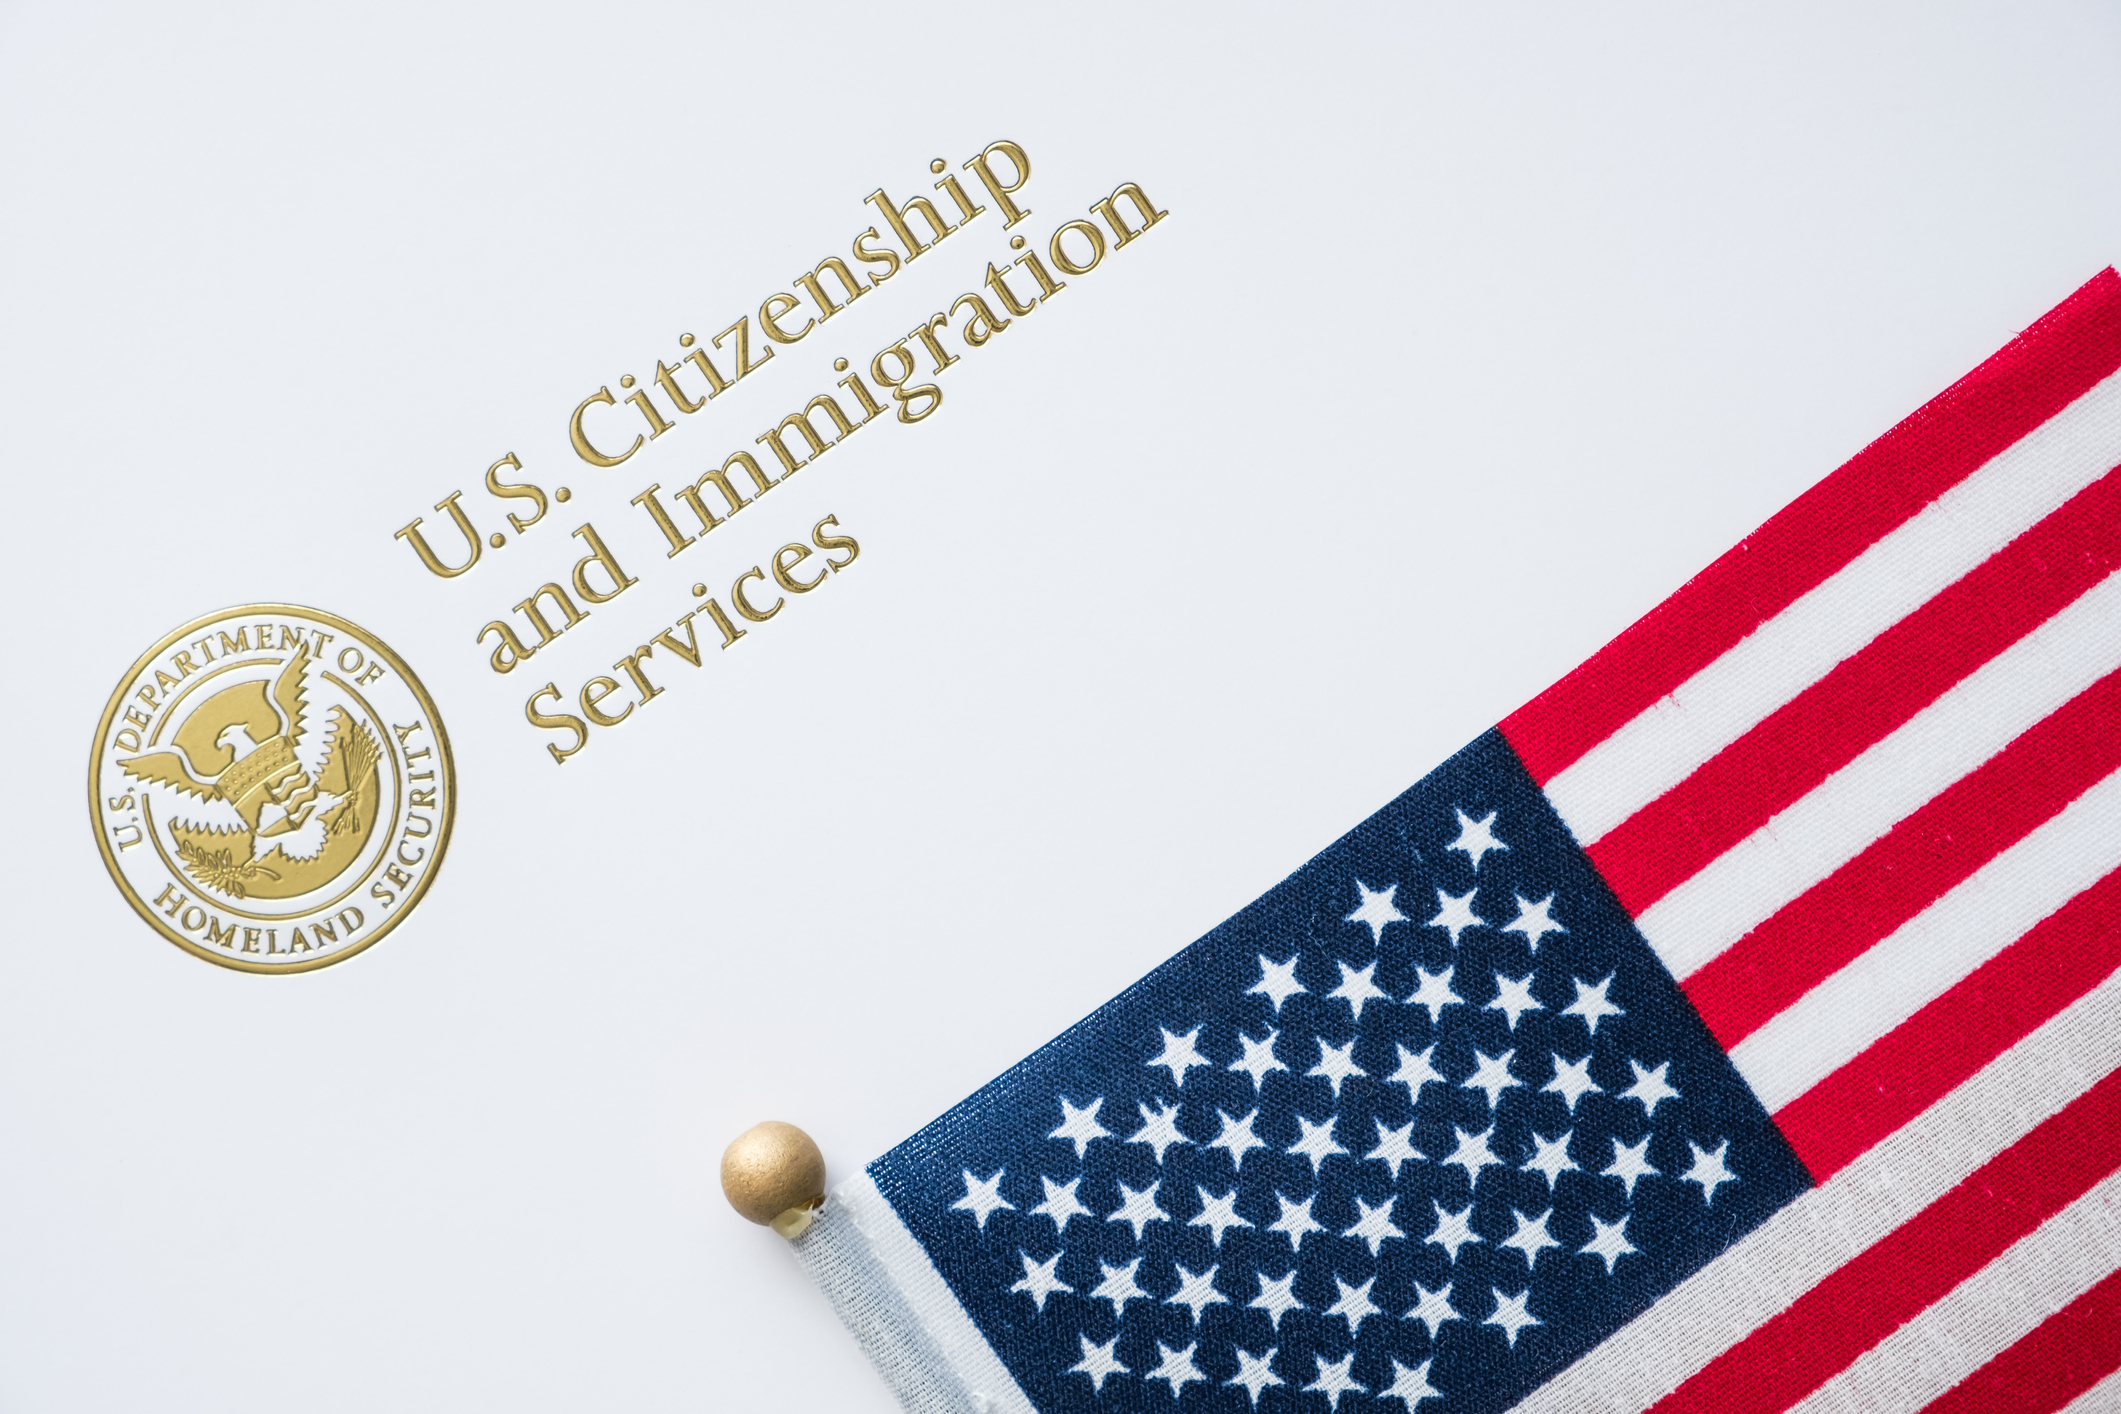 US visa and immigration services with American flag